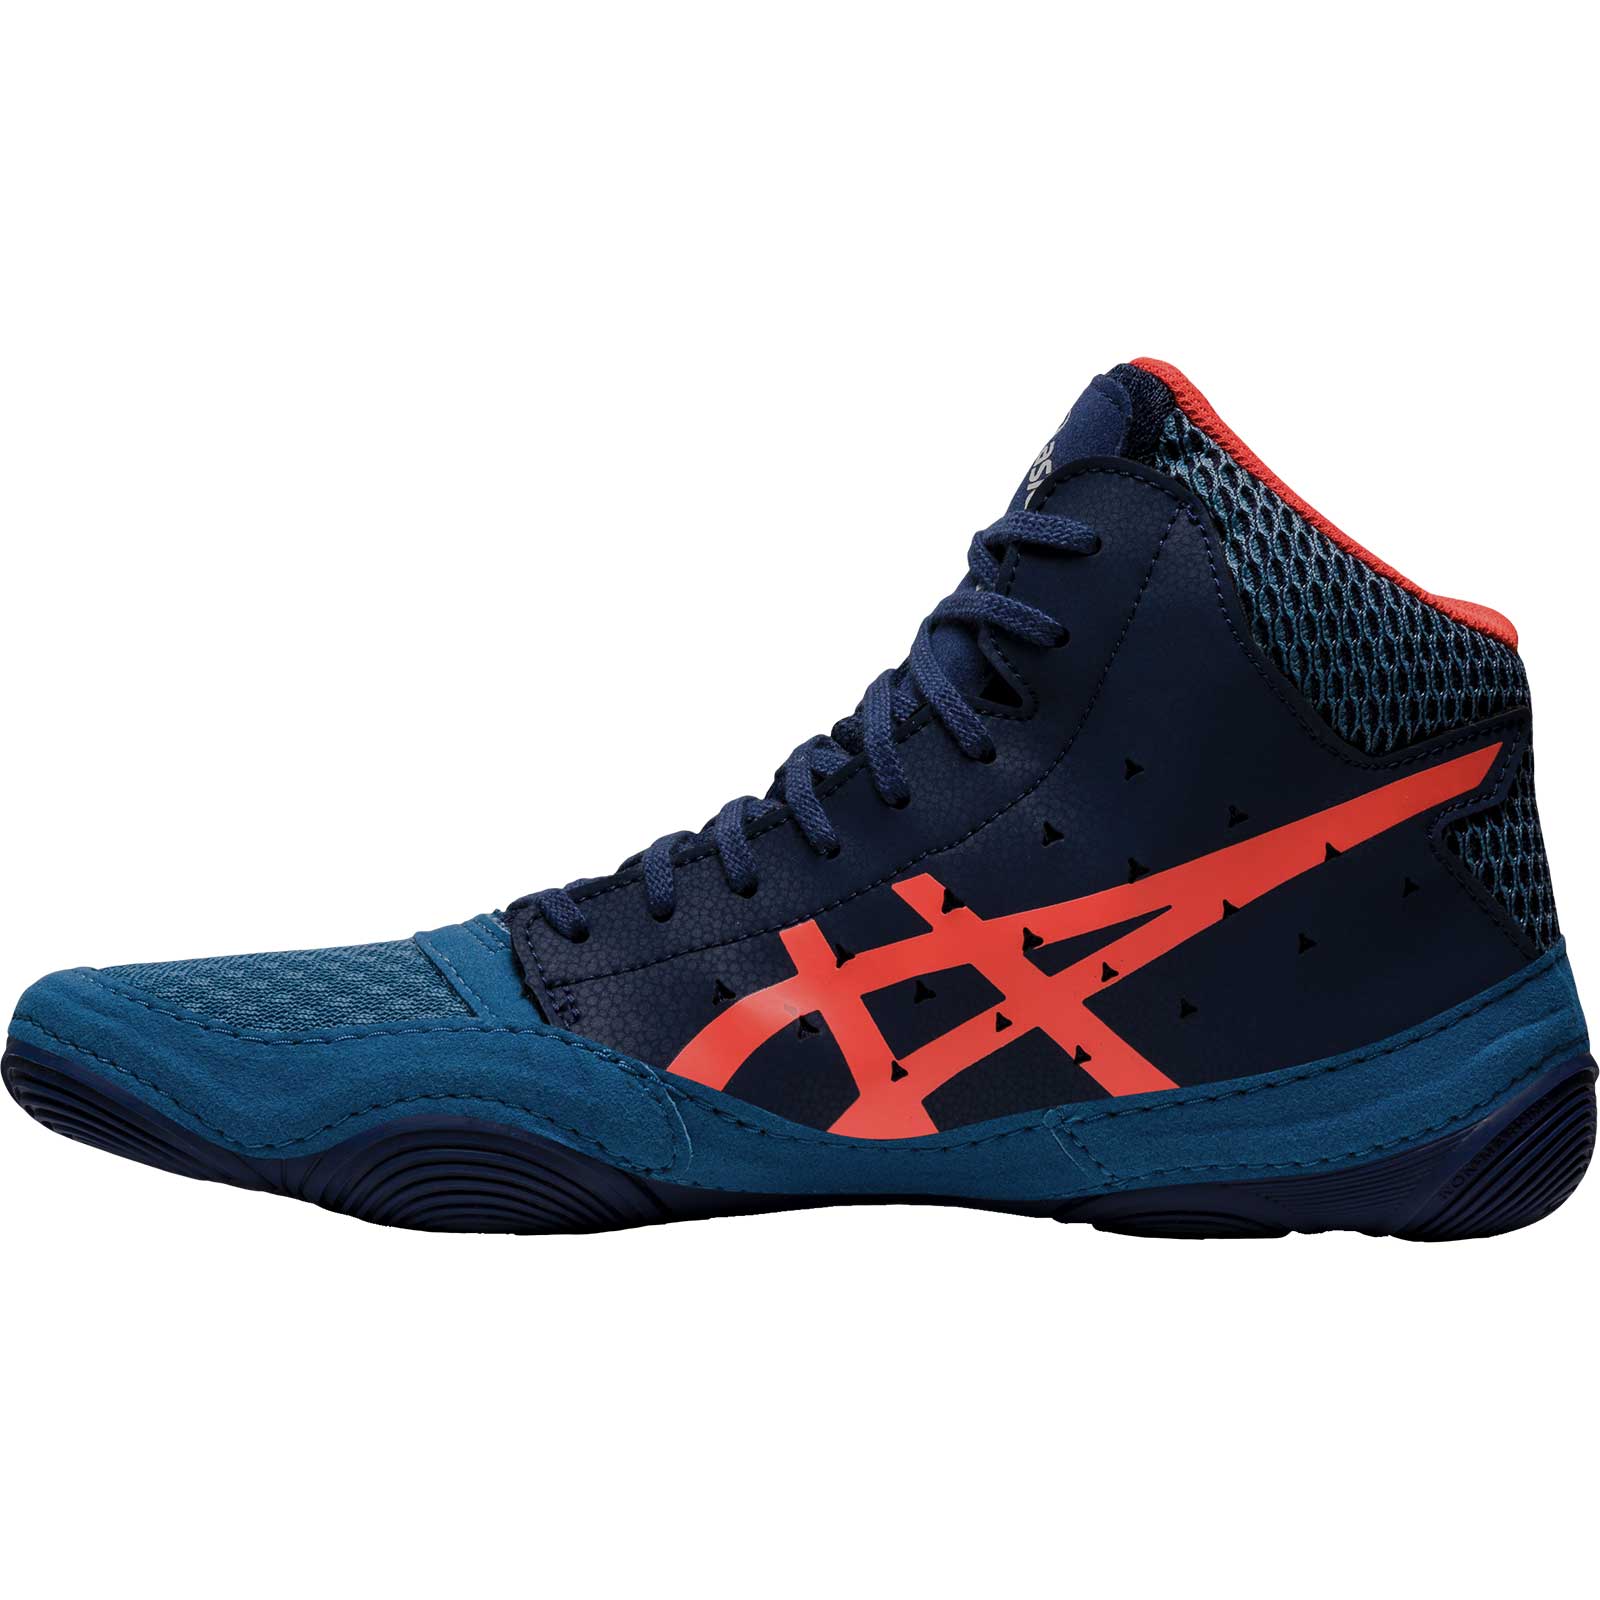 Asics Snapdown 3 GS Boys Wrestling Shoes - Medial View